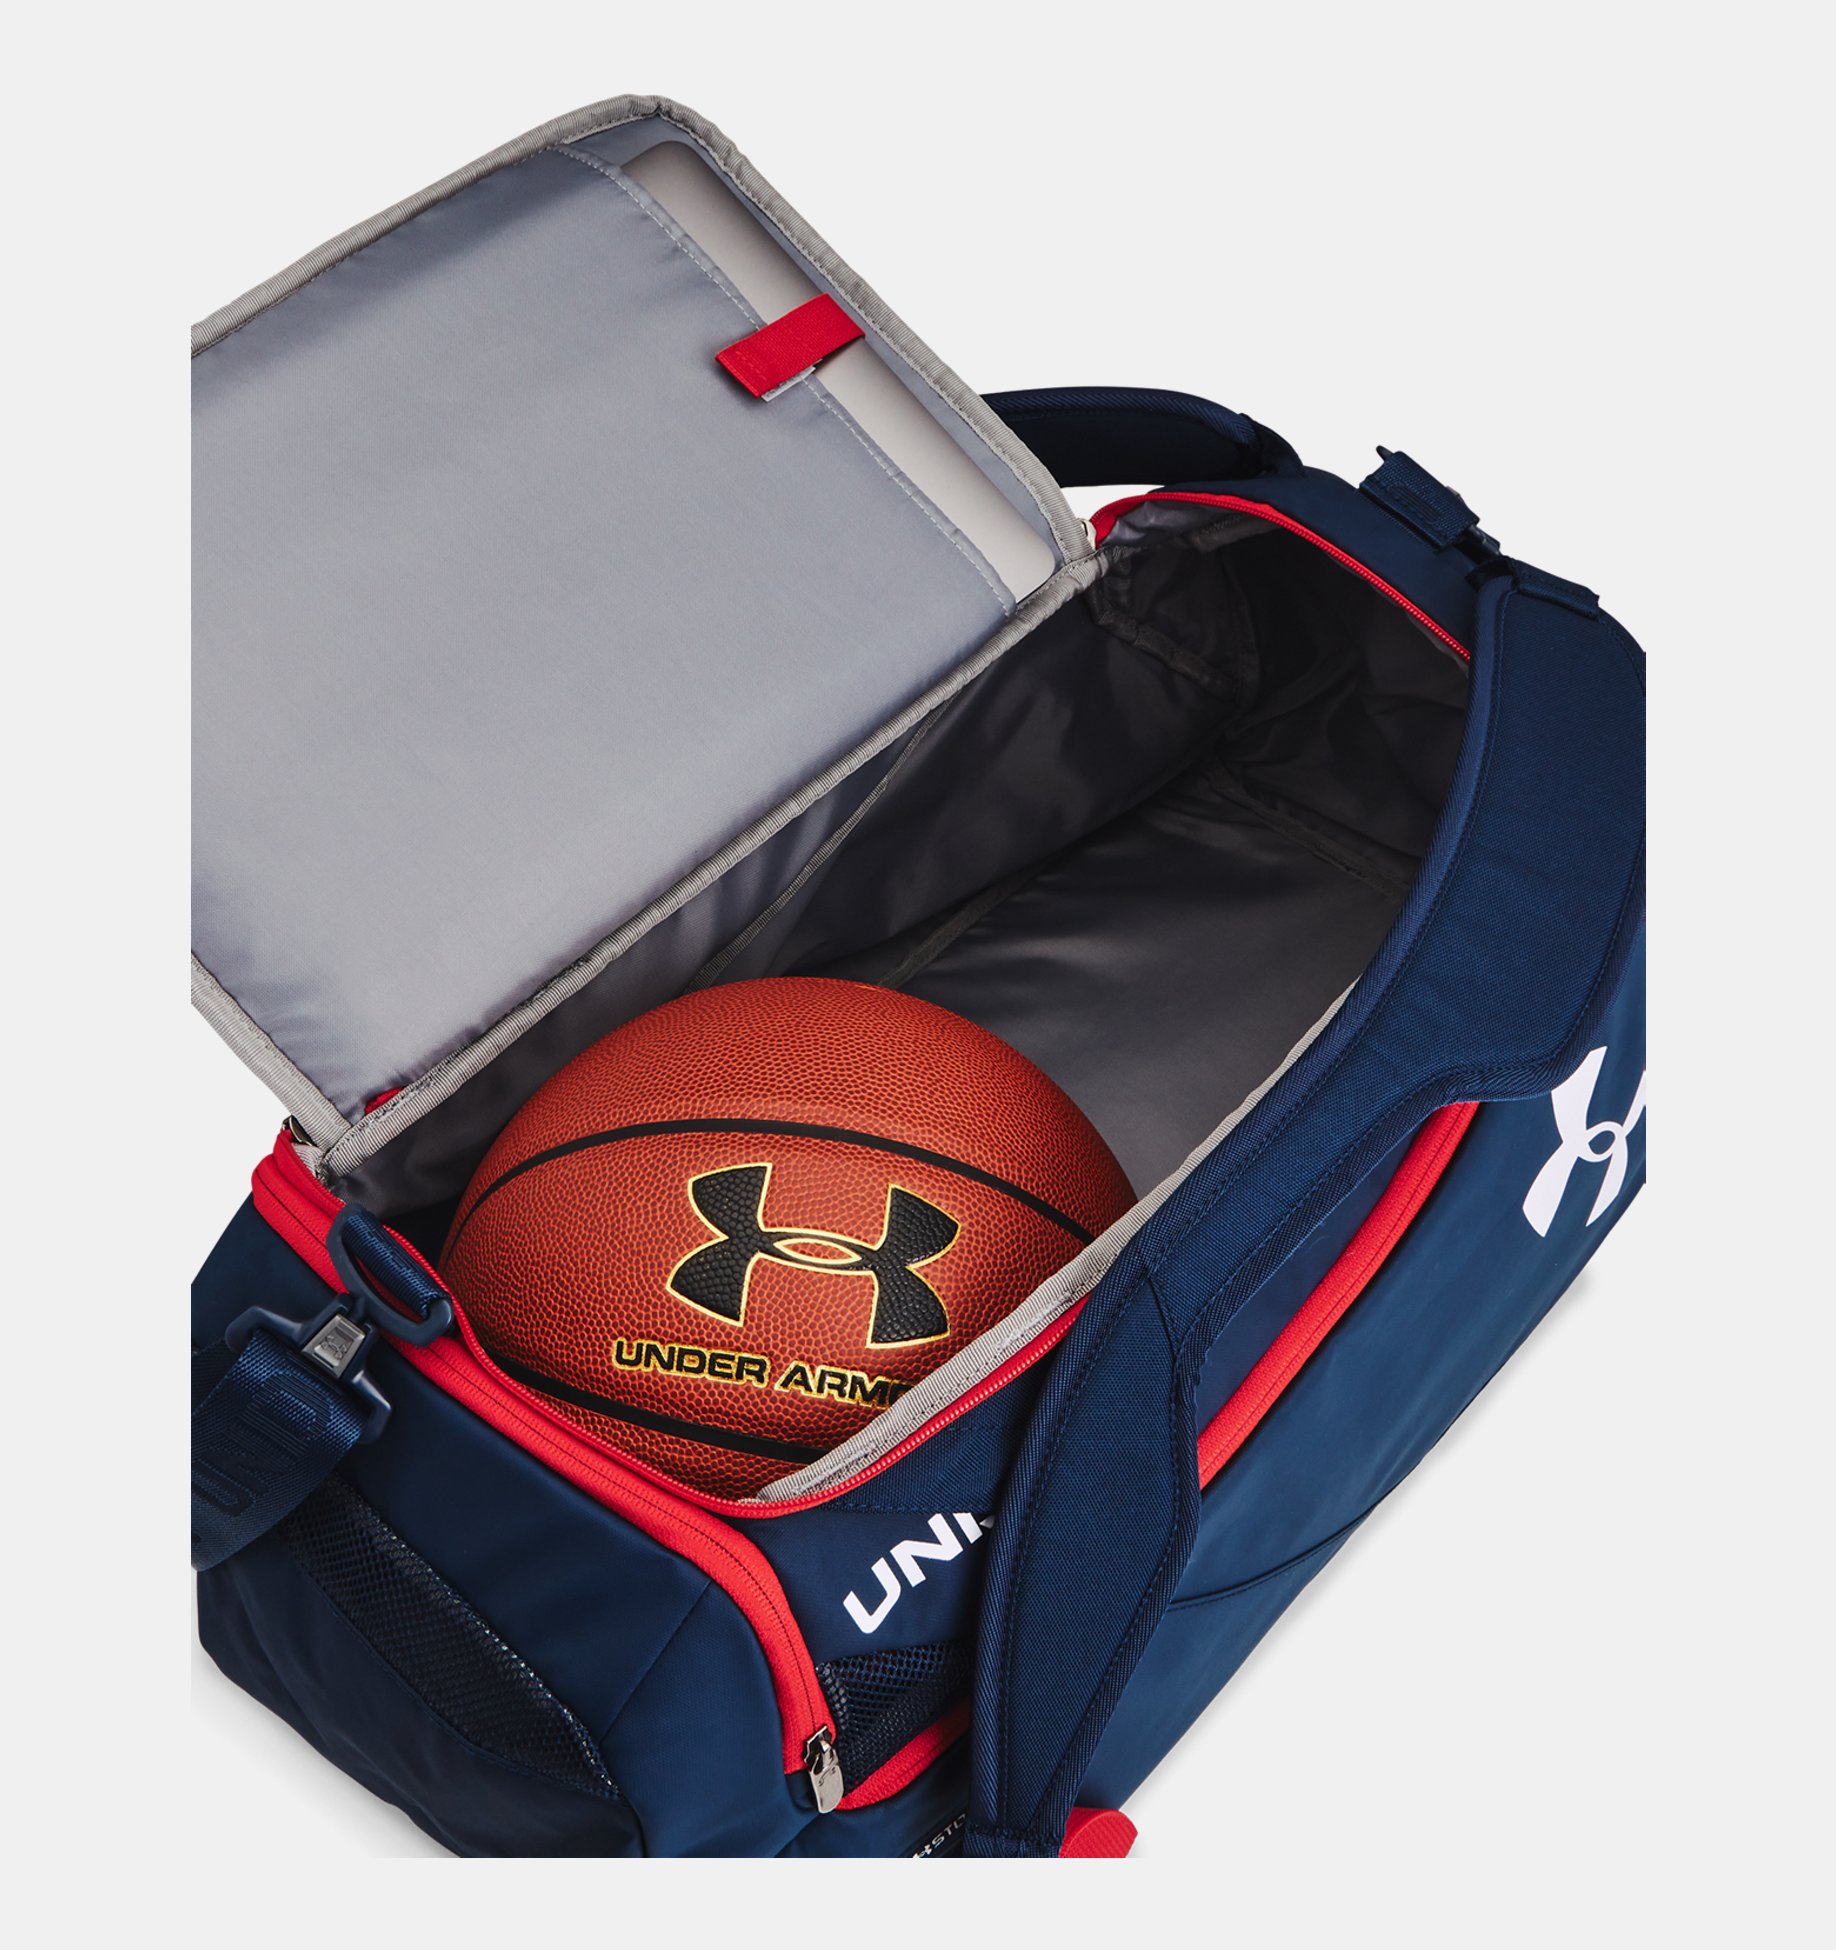 S F012 Under Armour Contain Duo Duffle Tasche Gr 